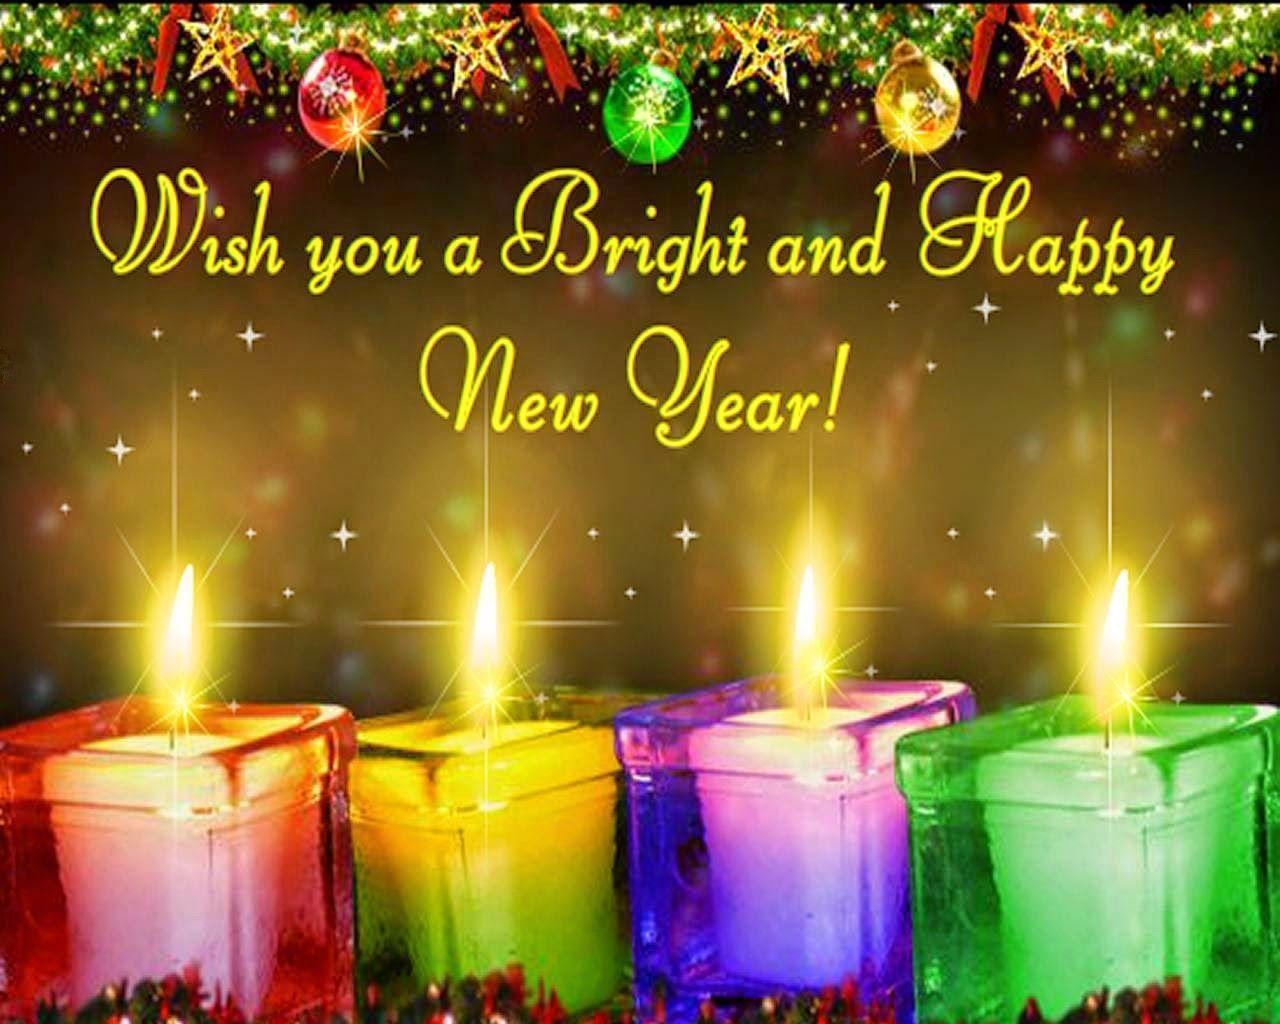 Happy New Year 2017 Image HD Download New Year 2017